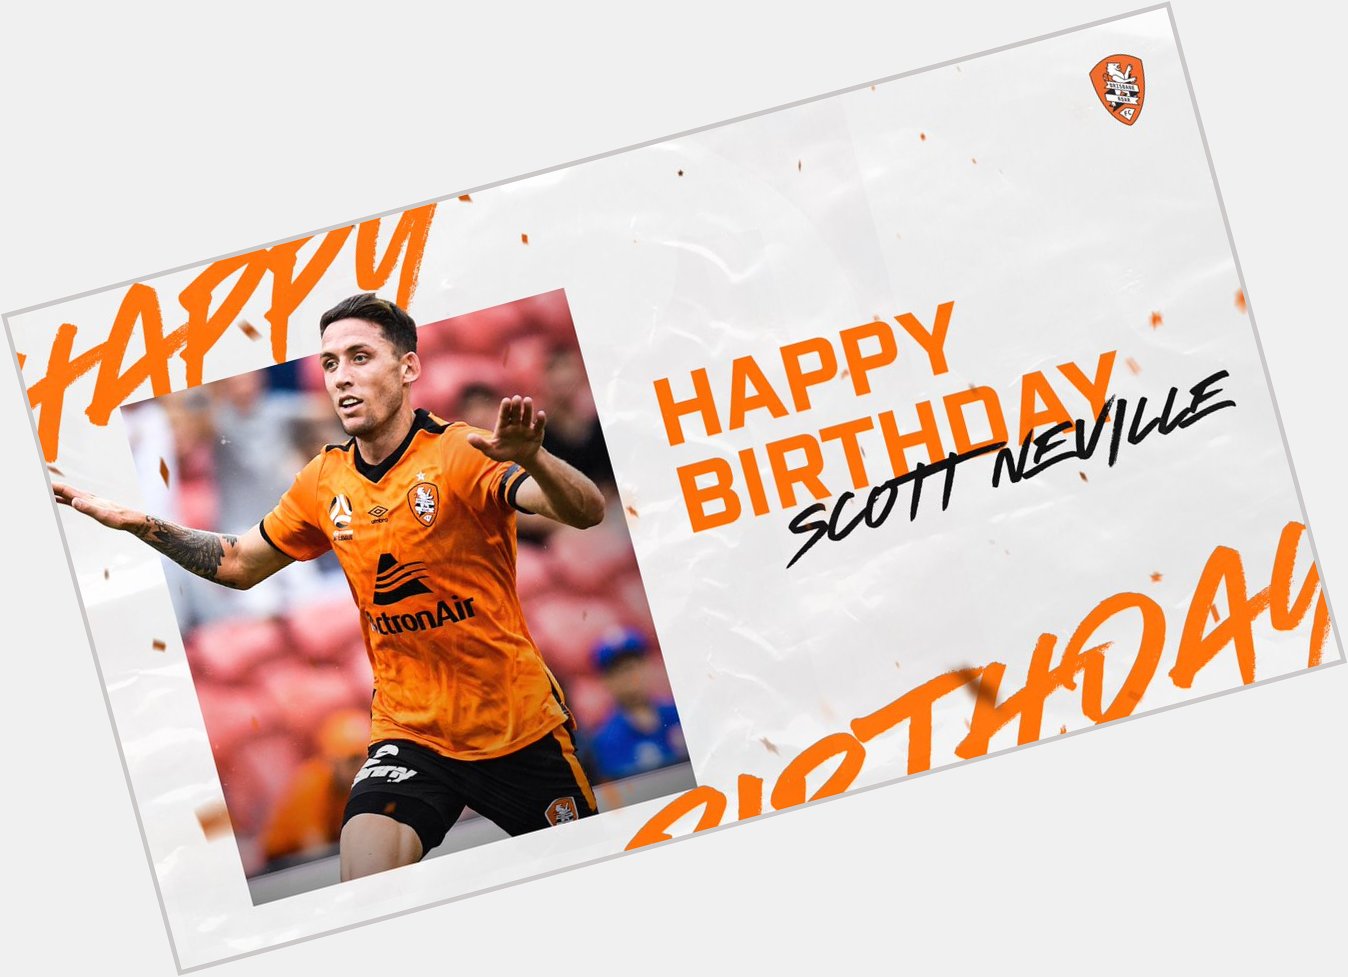 Happy Birthday to Scott Neville! We ll see you back in Brisbane soon 